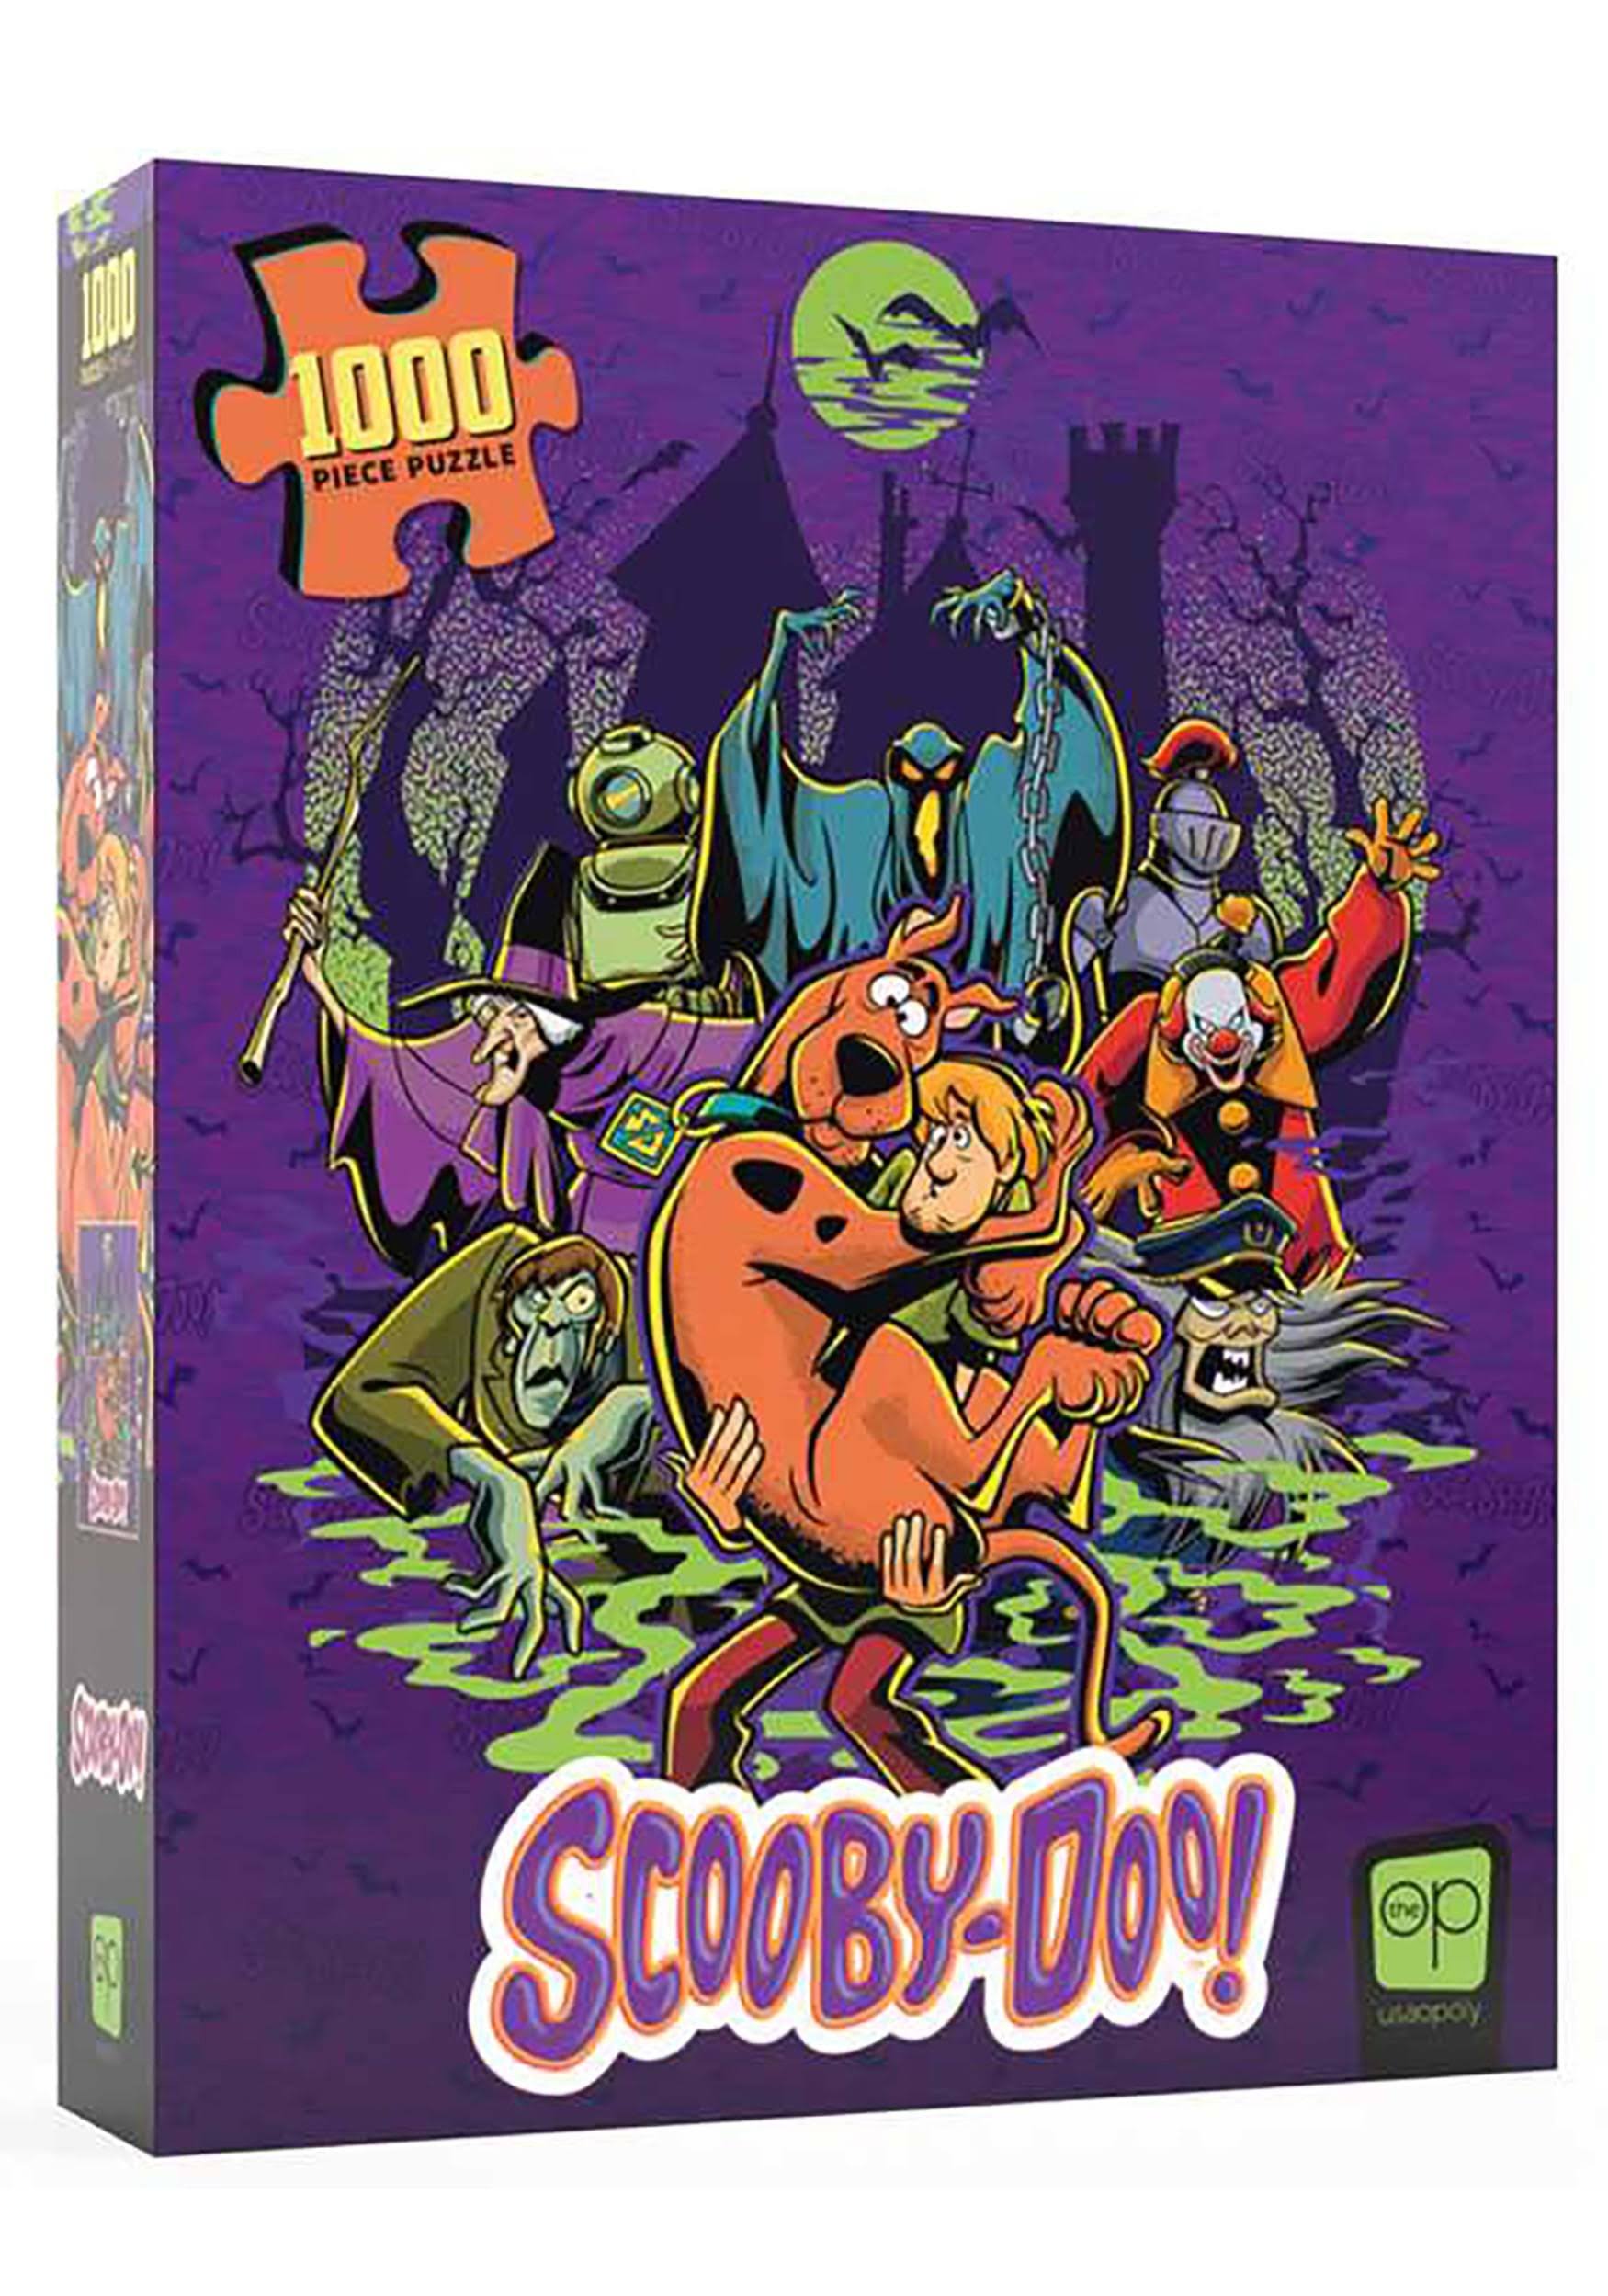 USAopoly Scooby-Doo zoinks 1000 Piece Puzzle